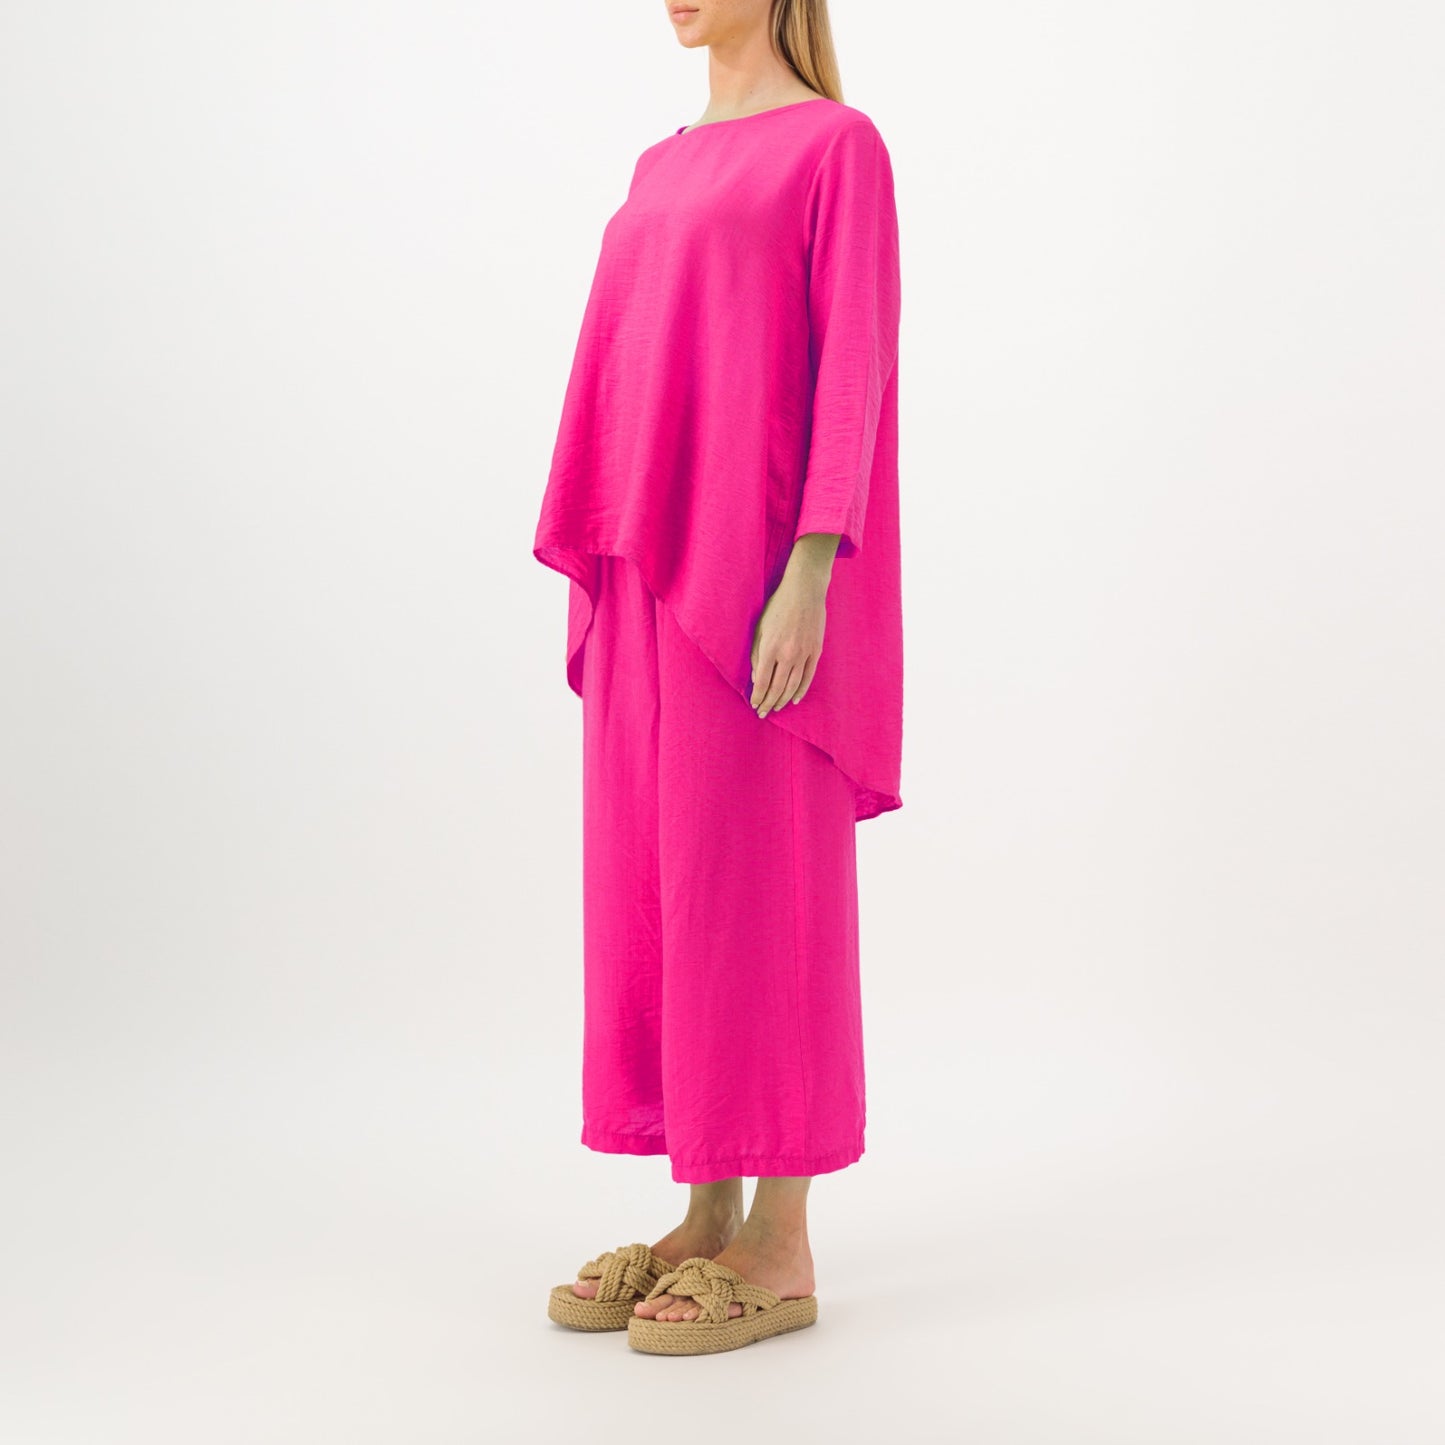 The Pink Lilies outfit Set - All Day Closet Set of 2  - Comfortable style in attractive colors - arabian outfit - casual setcasual set - all day outfits - closet fashion store